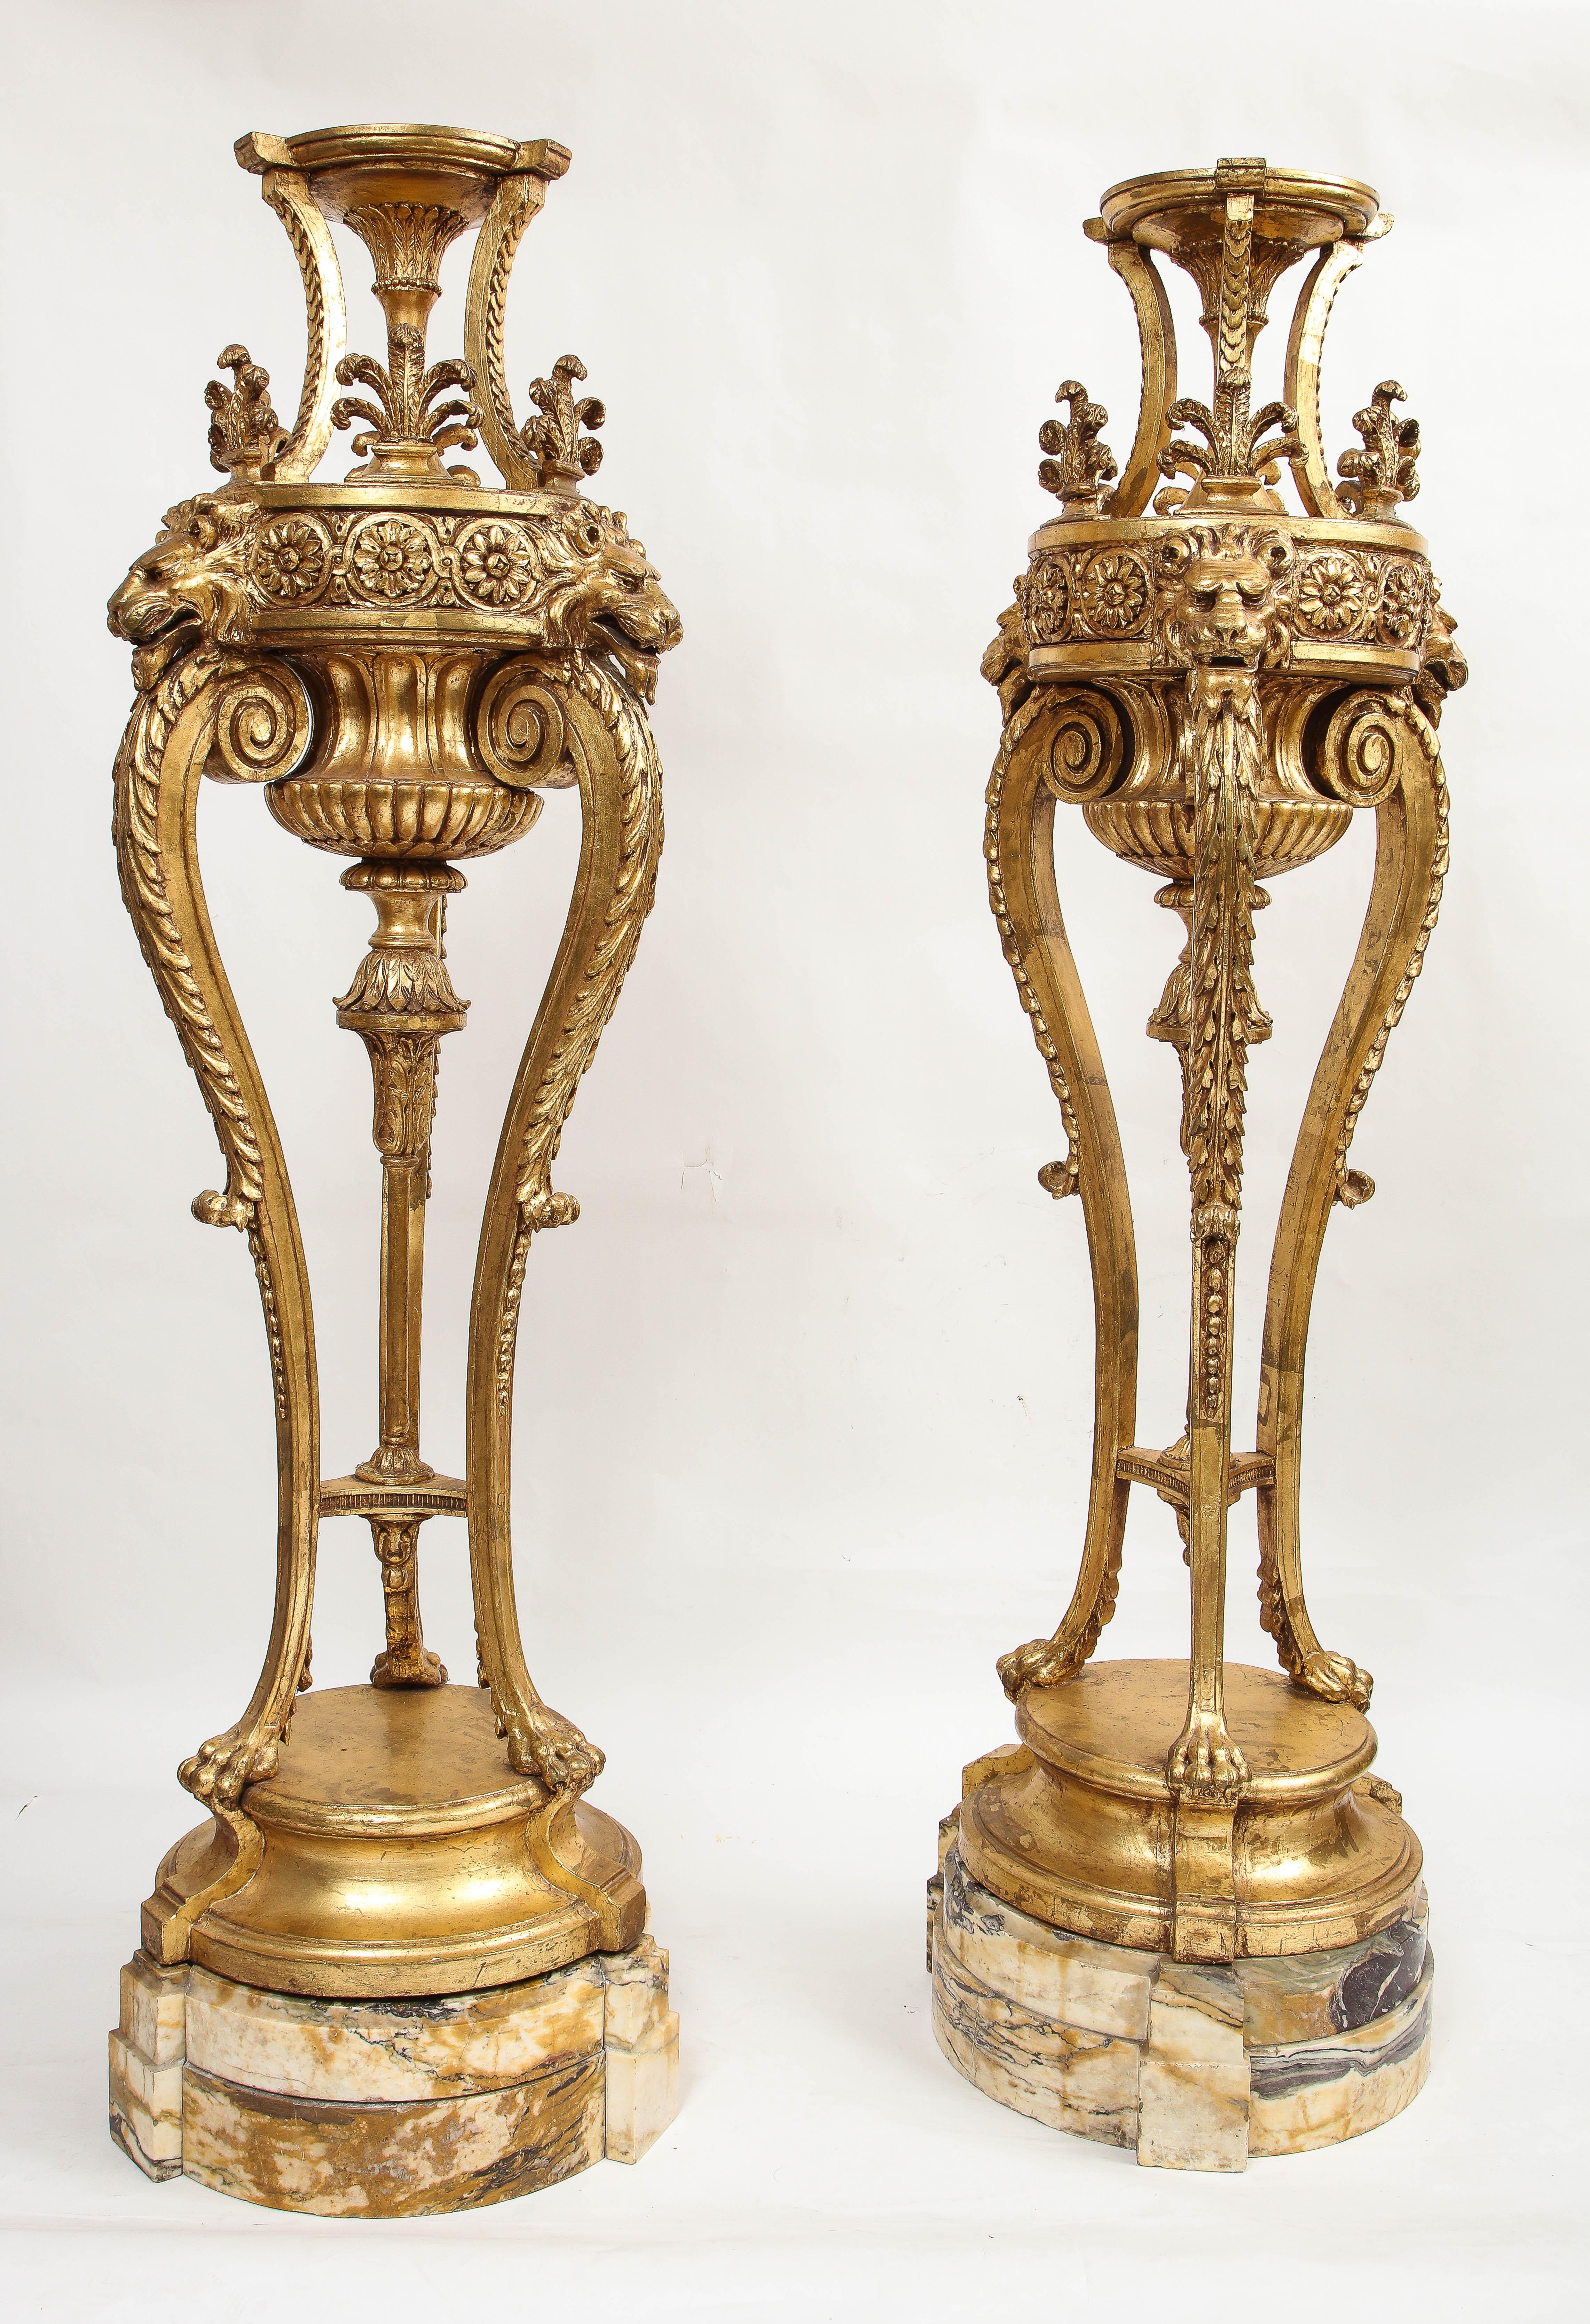 A Pair of Monumental 19th Century Louis XVI Giltwood Torchieres with Original Marble Bases, Attributed to E.F Caldwell.  Each is beautifully hand-carved with tremendous detail.  The upper portion of each are marvelous with a pedestal top to display